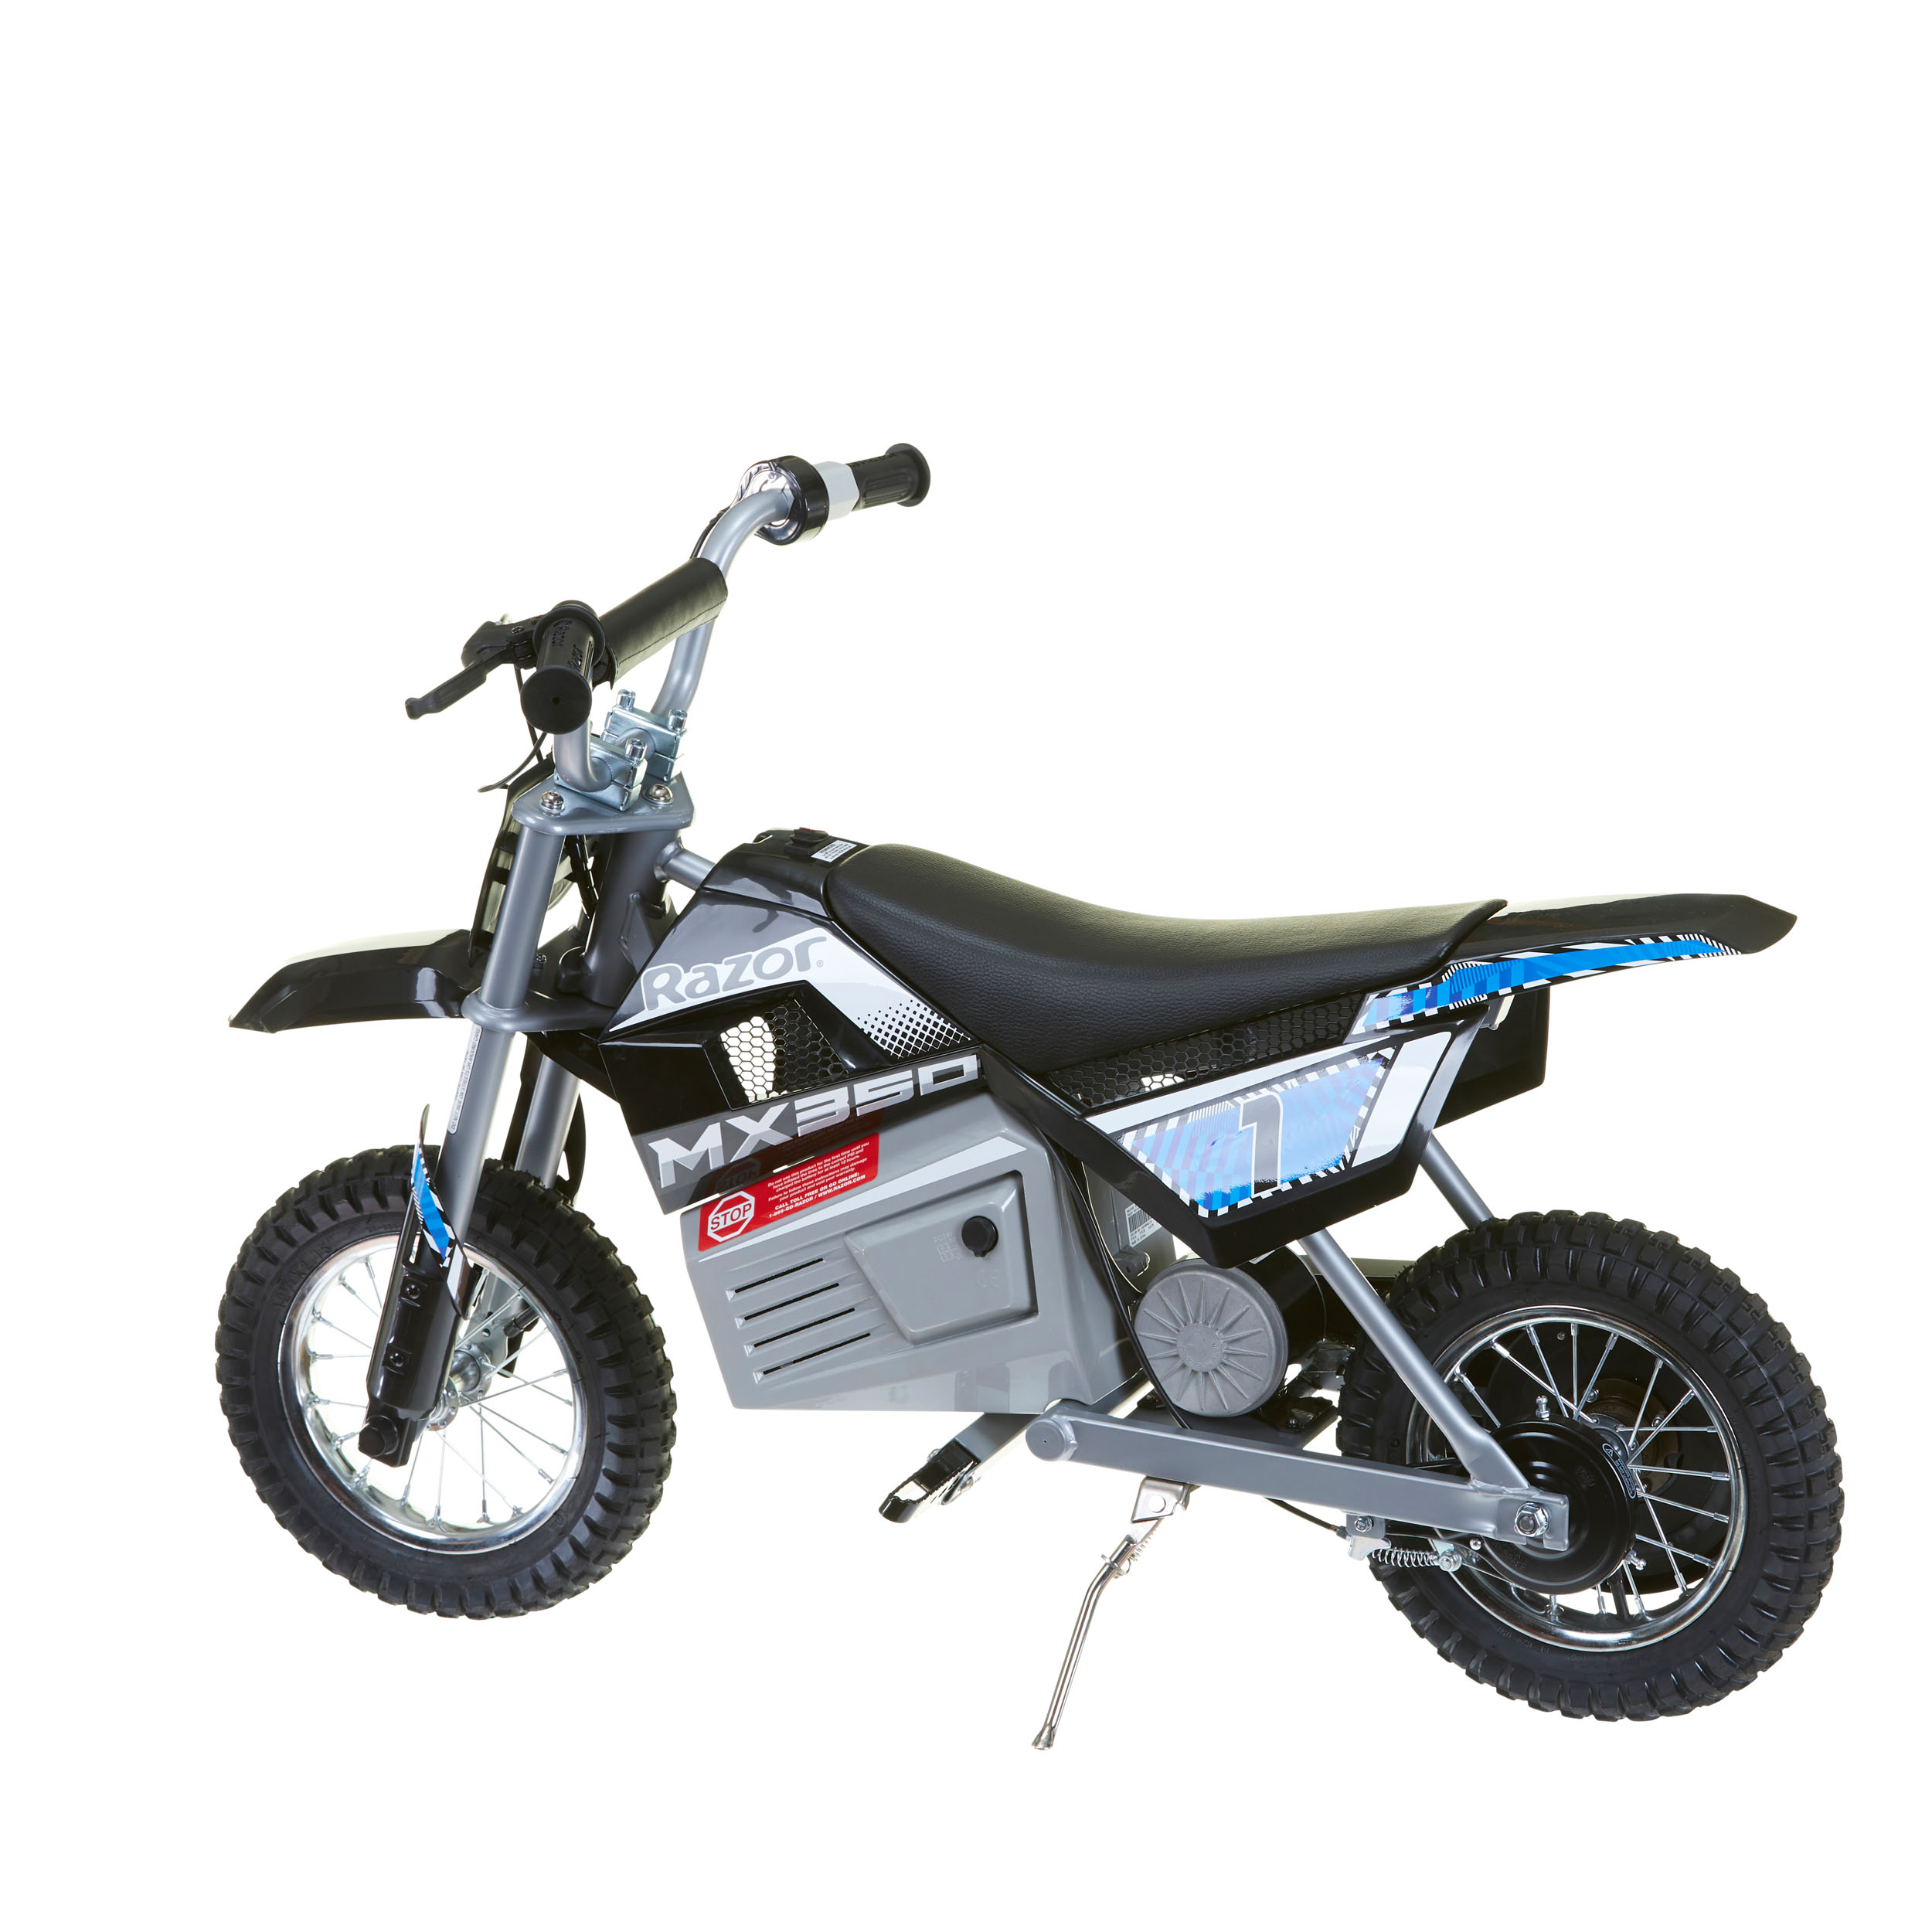 Razor Dirt Rocket MX350 - Black with Decals Included, 24V Electric